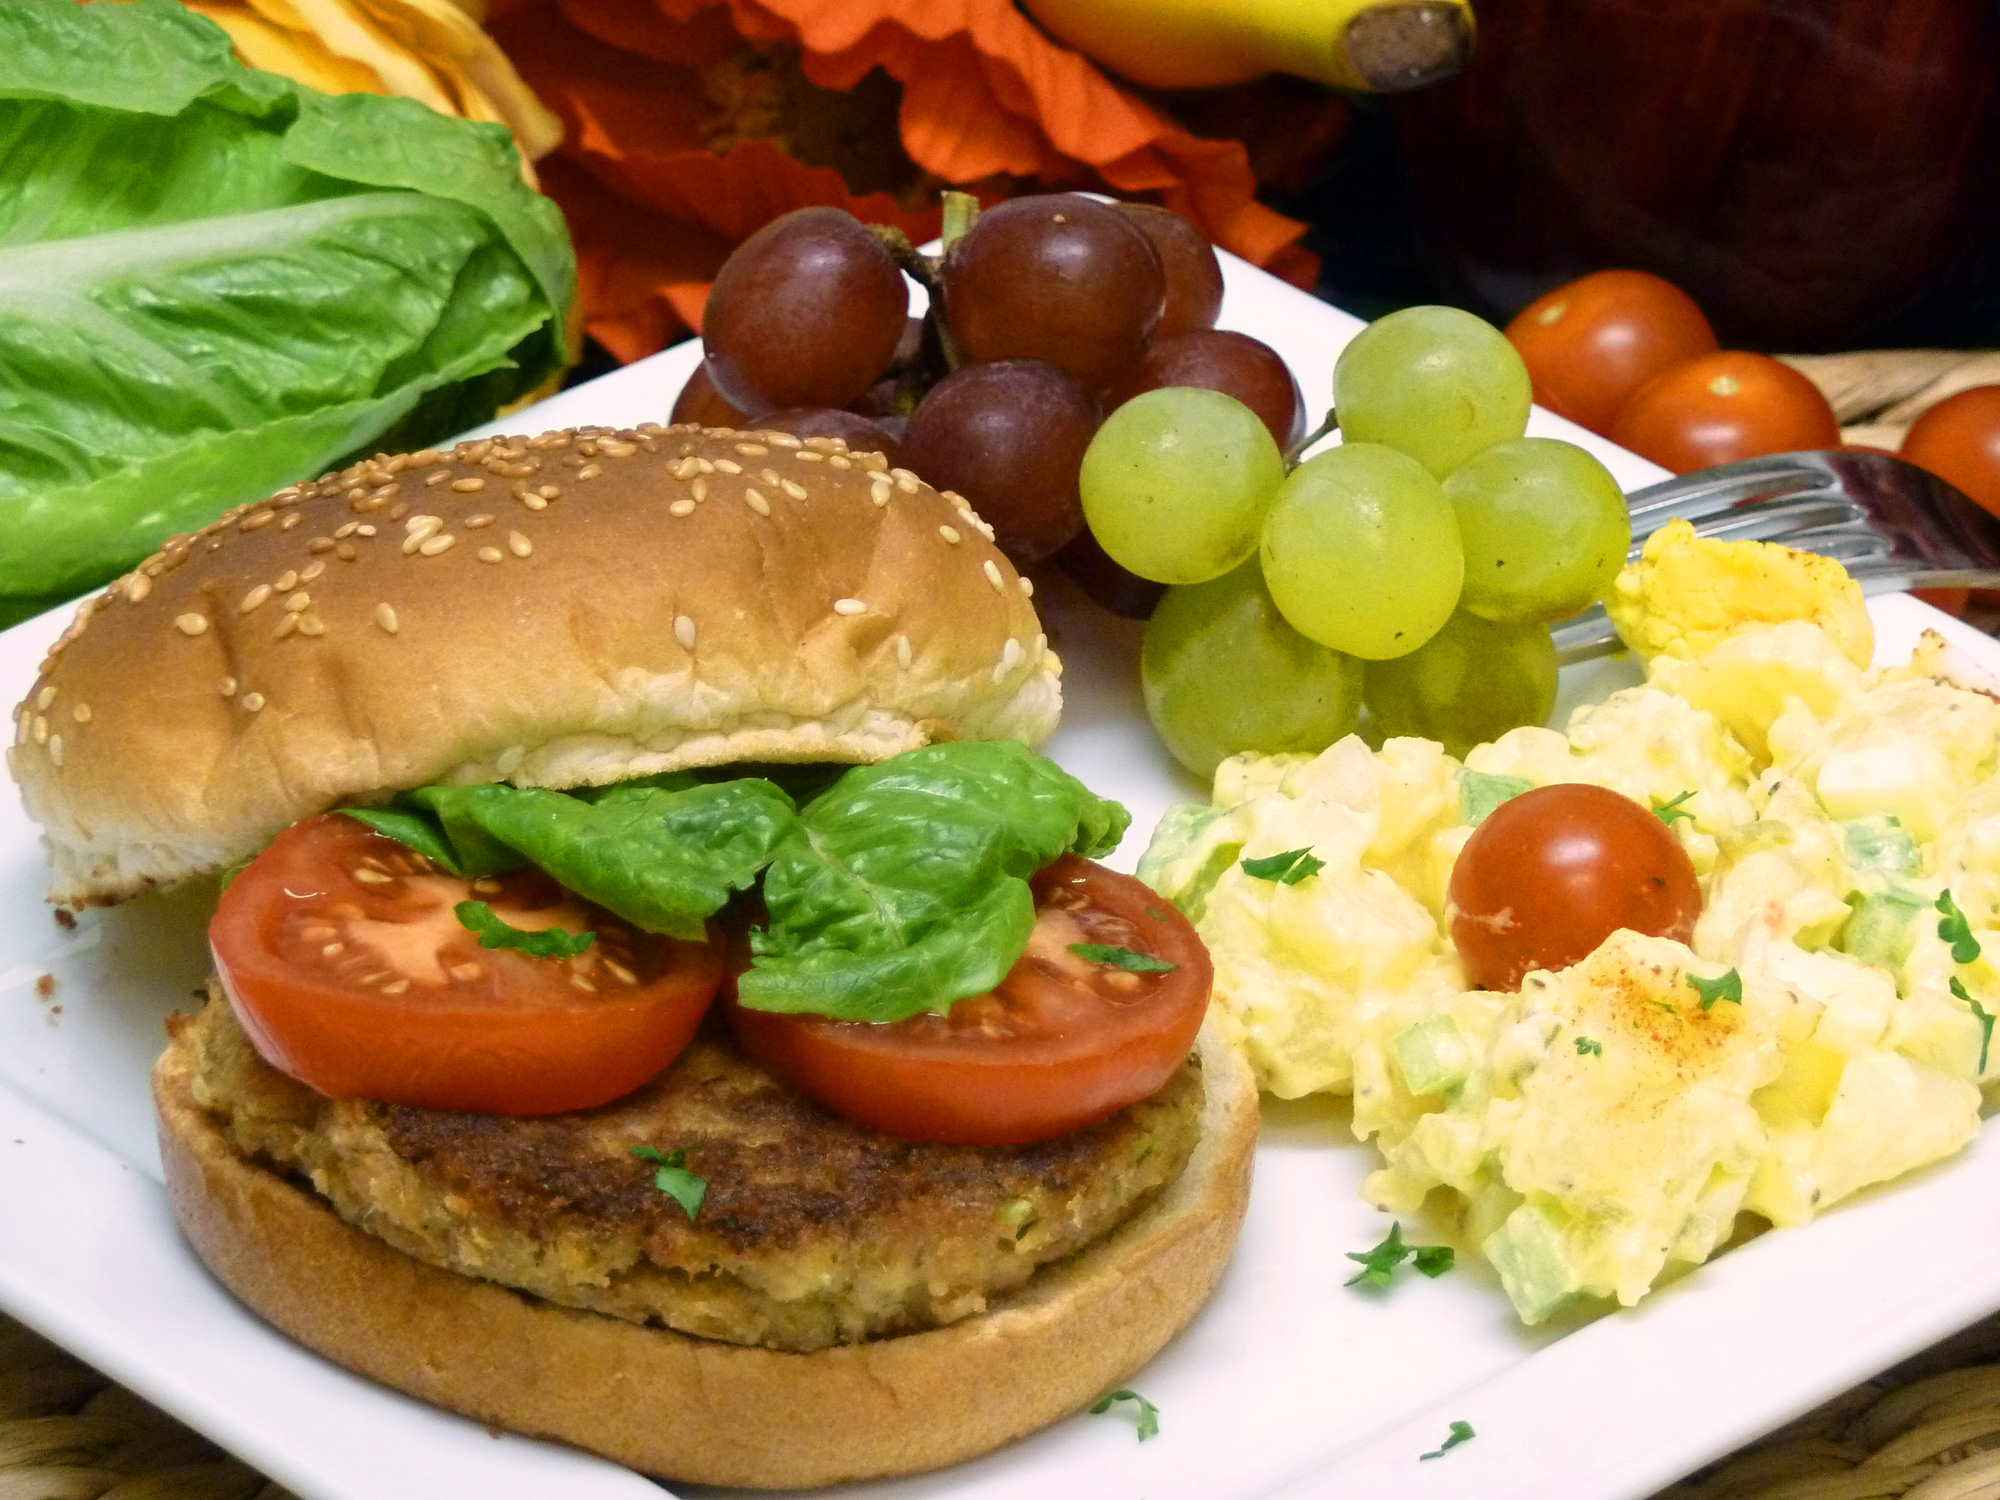 Flavorful tuna burgers are great on a bun or as a stand-alone entree.